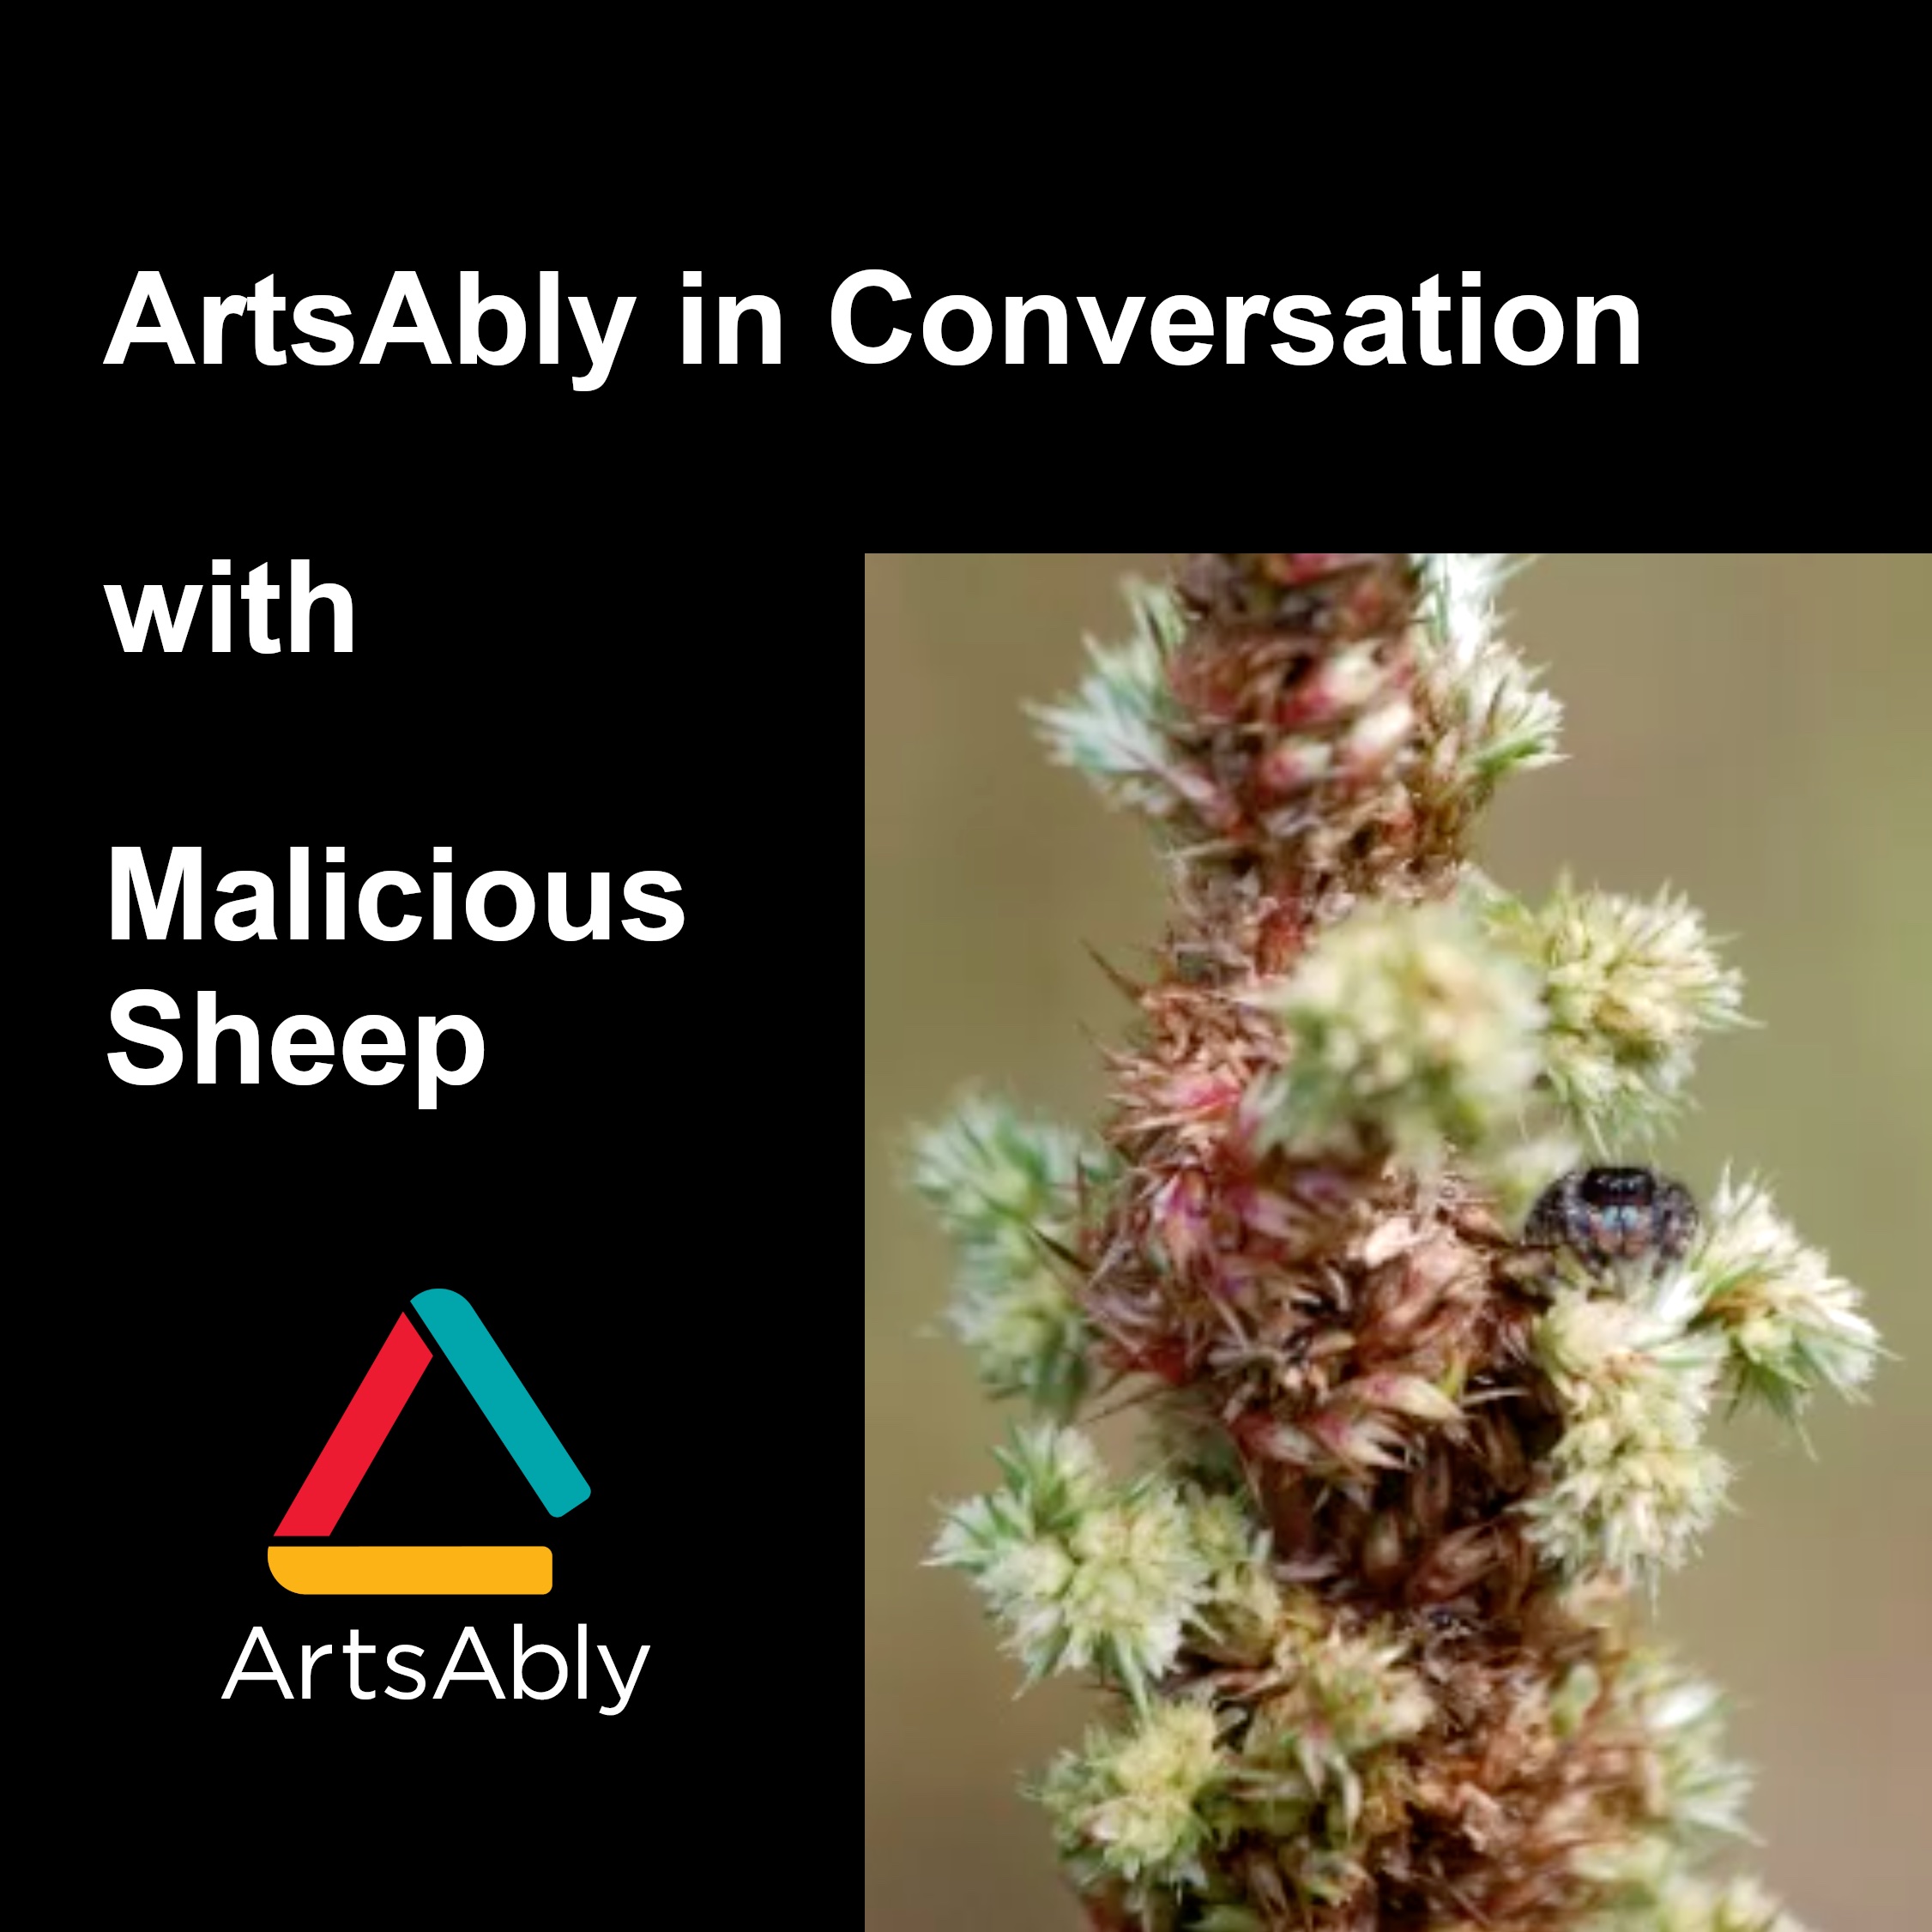 Episode 9: ArtsAbly in Conversation with Malicious Sheep